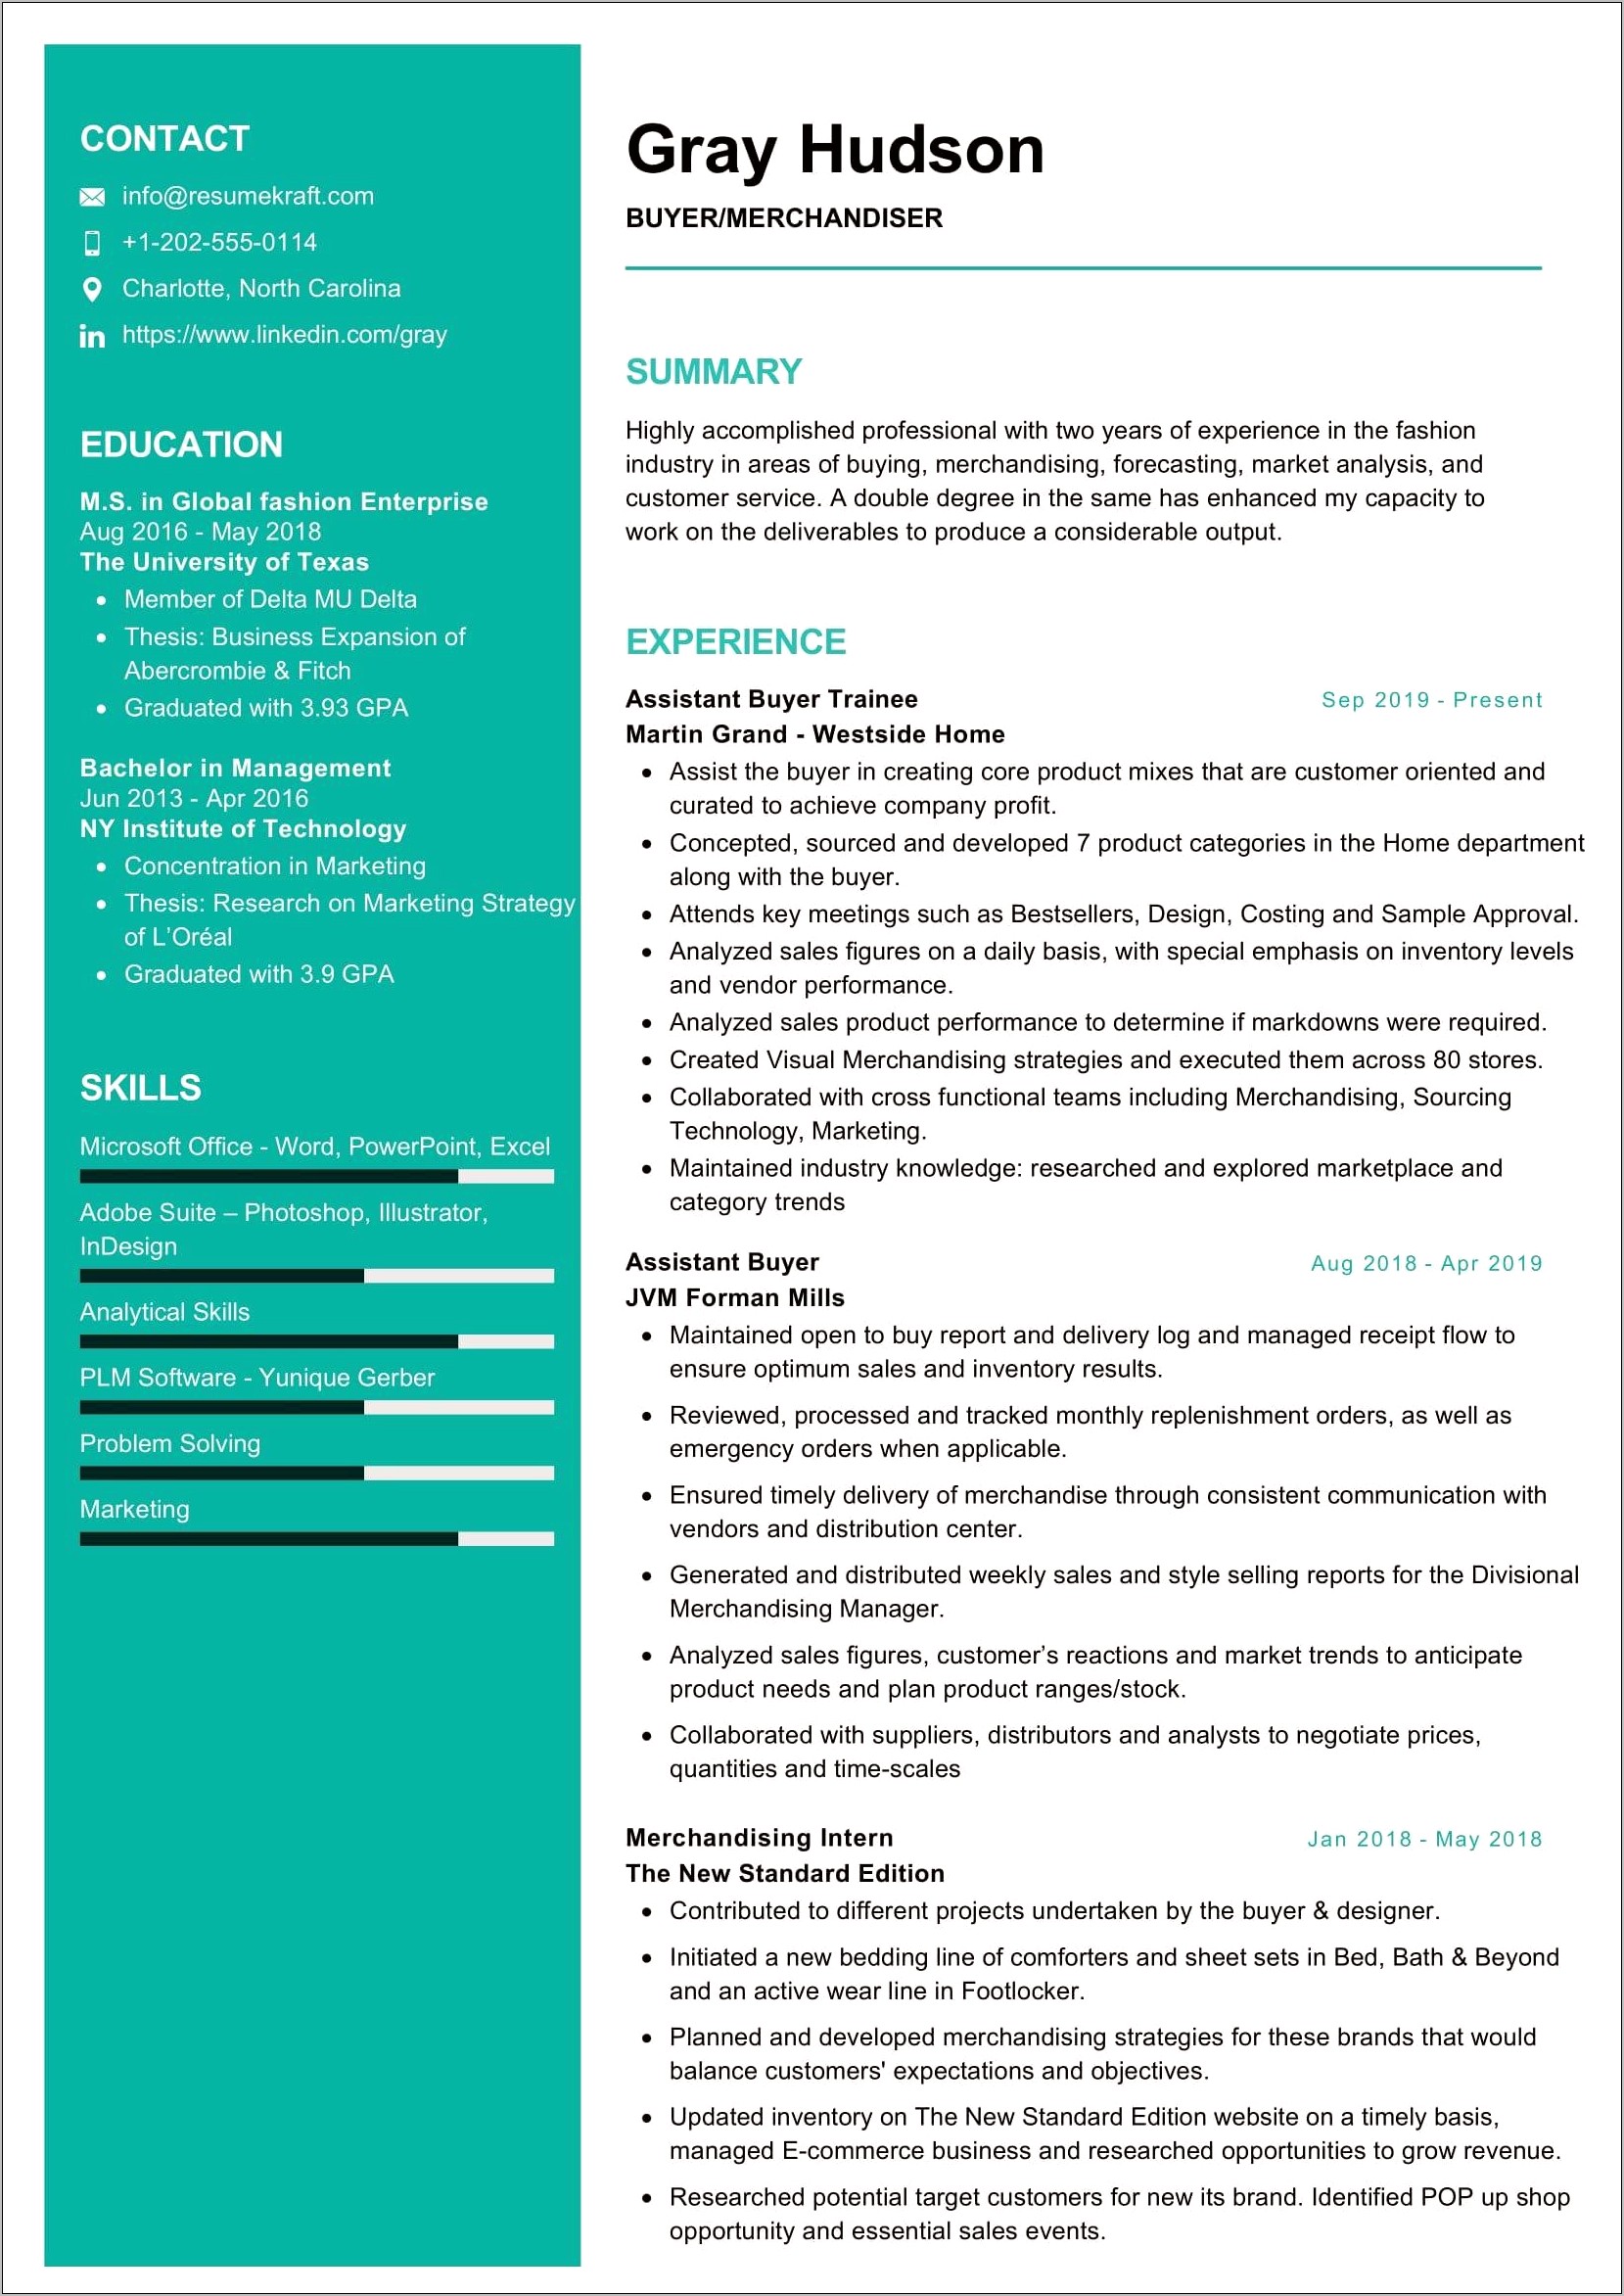 Visual Merchandising Manager Resume Objective